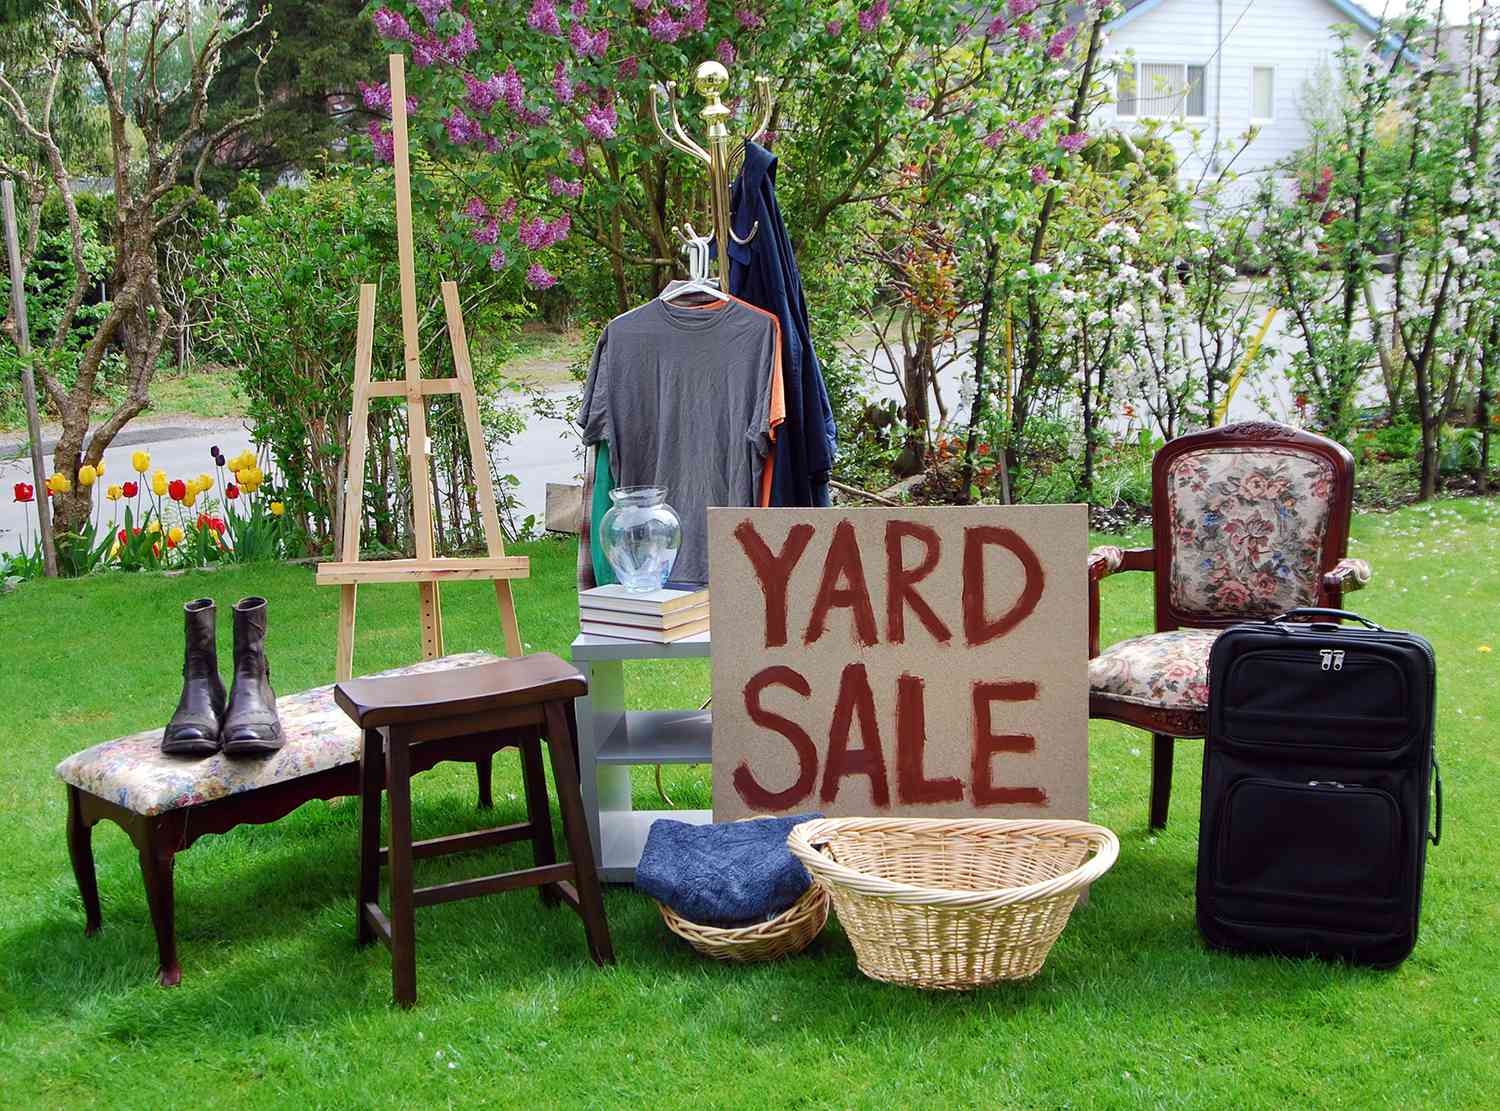 How to Score The Best Used Stuff at Yard Sales, Estate Sales, and Garage Sales | Real Simple